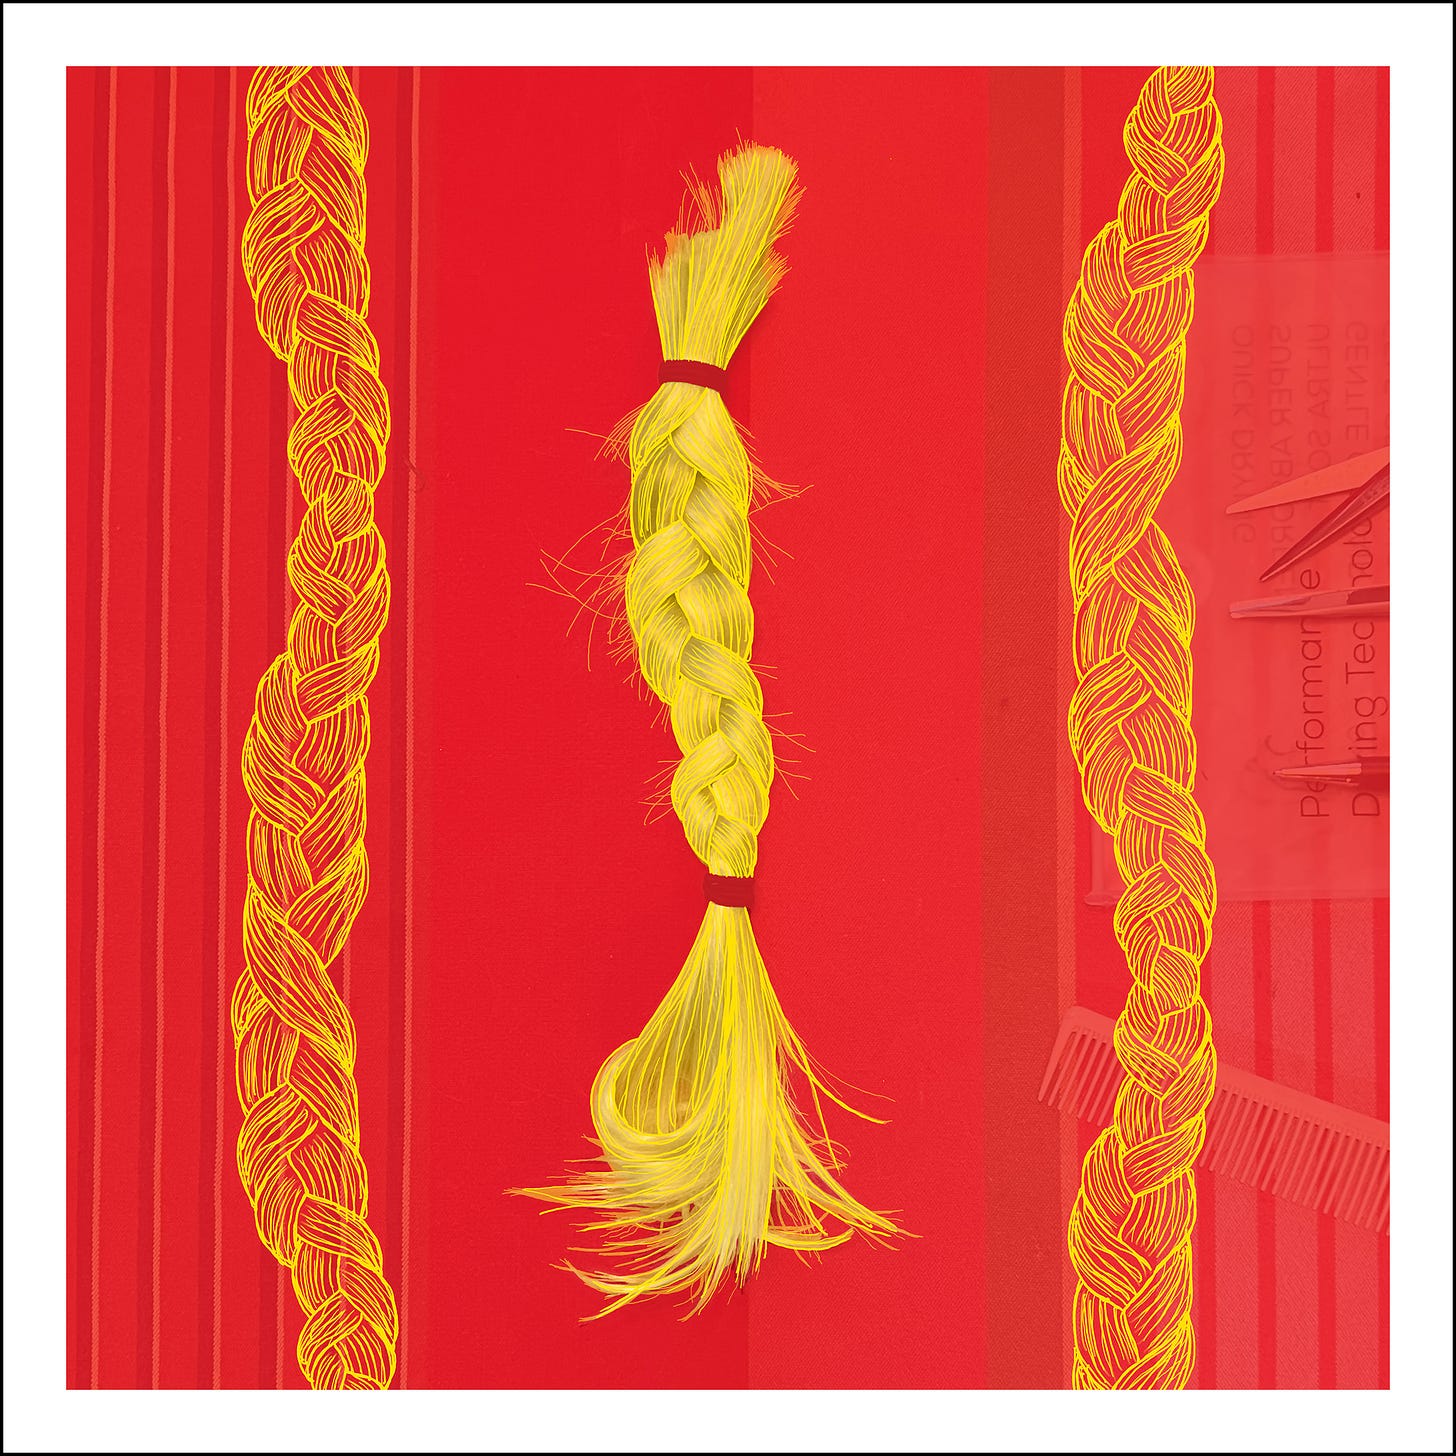 Rainbow Squared Year Seven, 03. Red Yellow. A photo of a braid of hair rests on a red tablecloth with yellow stripes and a comb and scissors in the background under a red overlay. The braid is digitally colored yellow with lines drawn on top of it. Those same lines appear as neverending braids that run from the top to the bottom of the composition on both sides.